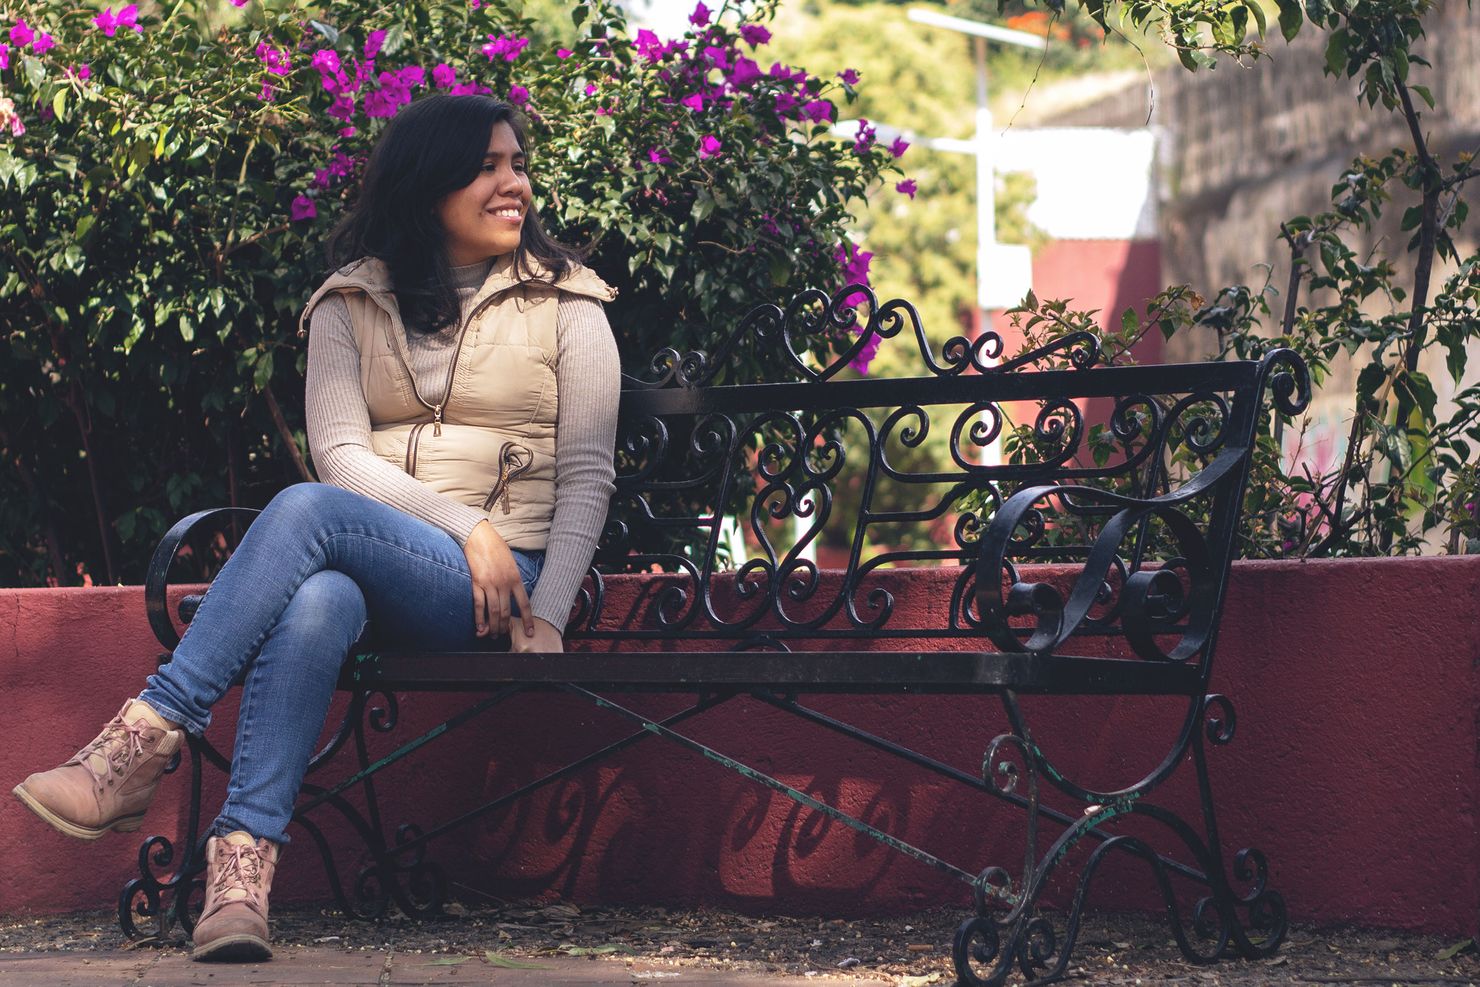 estrella, wearing jeans and a puffy vest, sits smiling on a black metal bench in front of a flowering bush